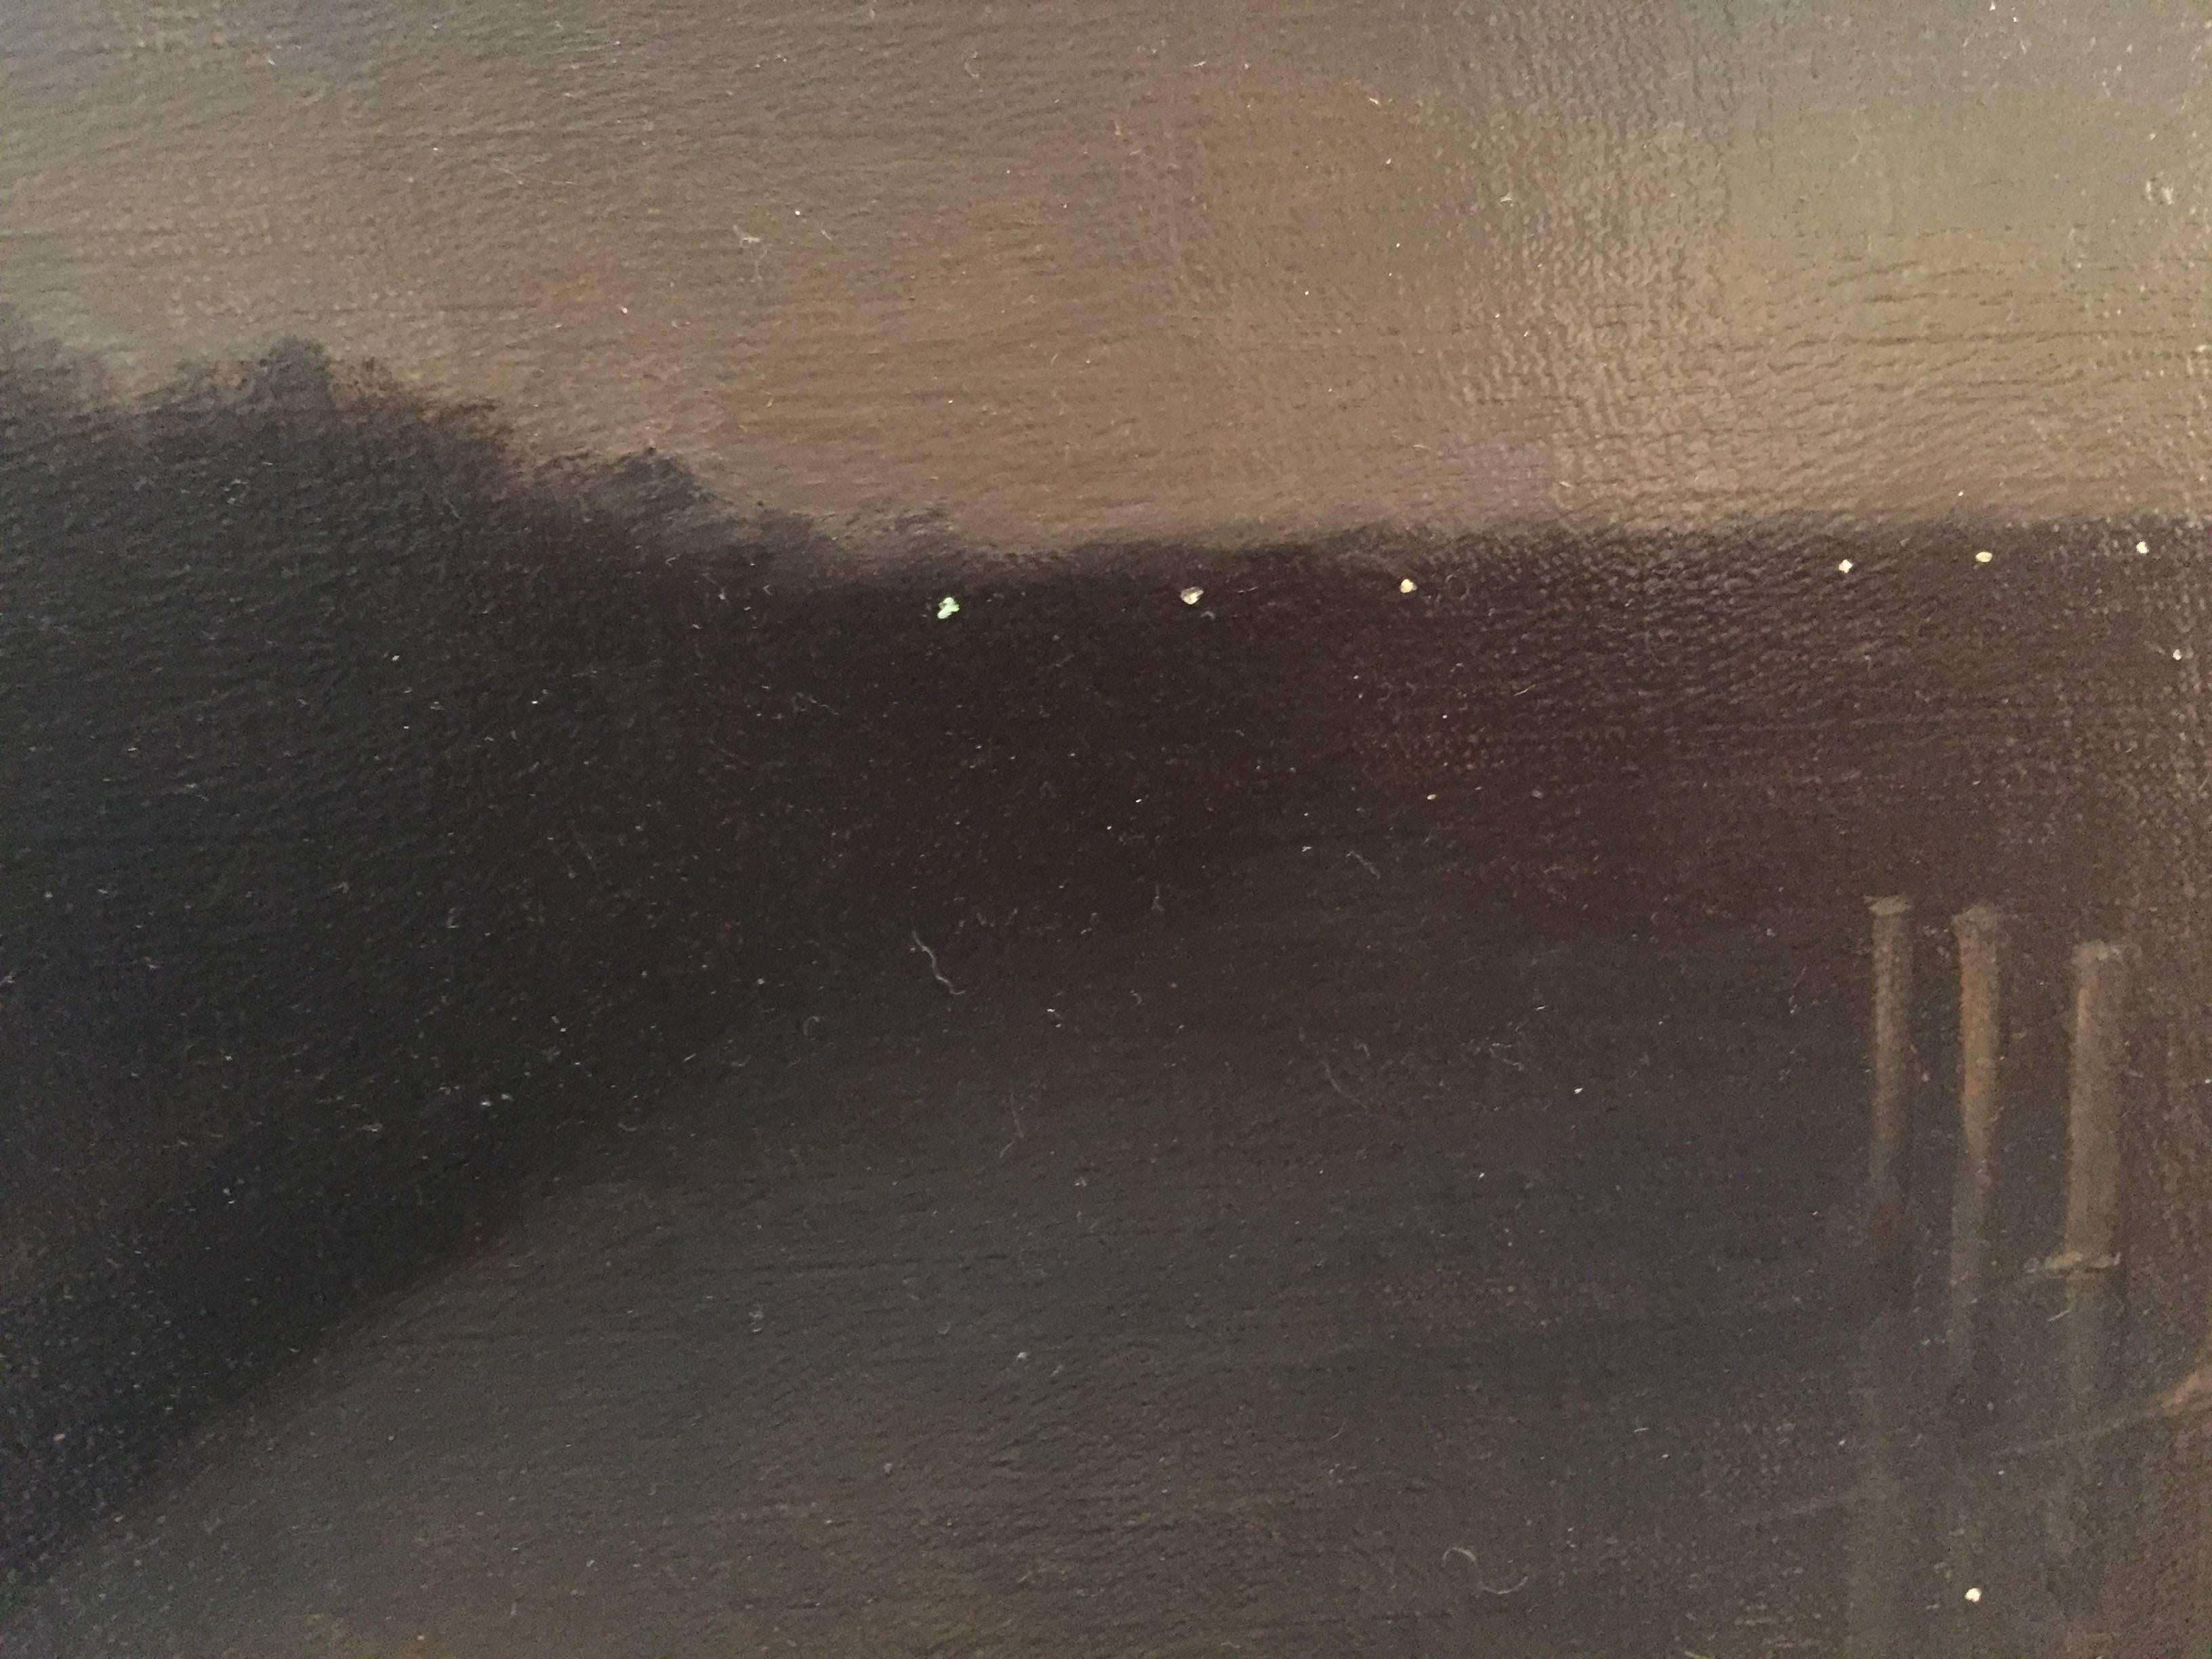 Painted from life, a nocturne scene of a dock on the bay. A single lamppost shines its light on the thin dock and onto the still gray water below. The horizon is made up of dark bushy outlines on the left, and then straightens out as land becomes